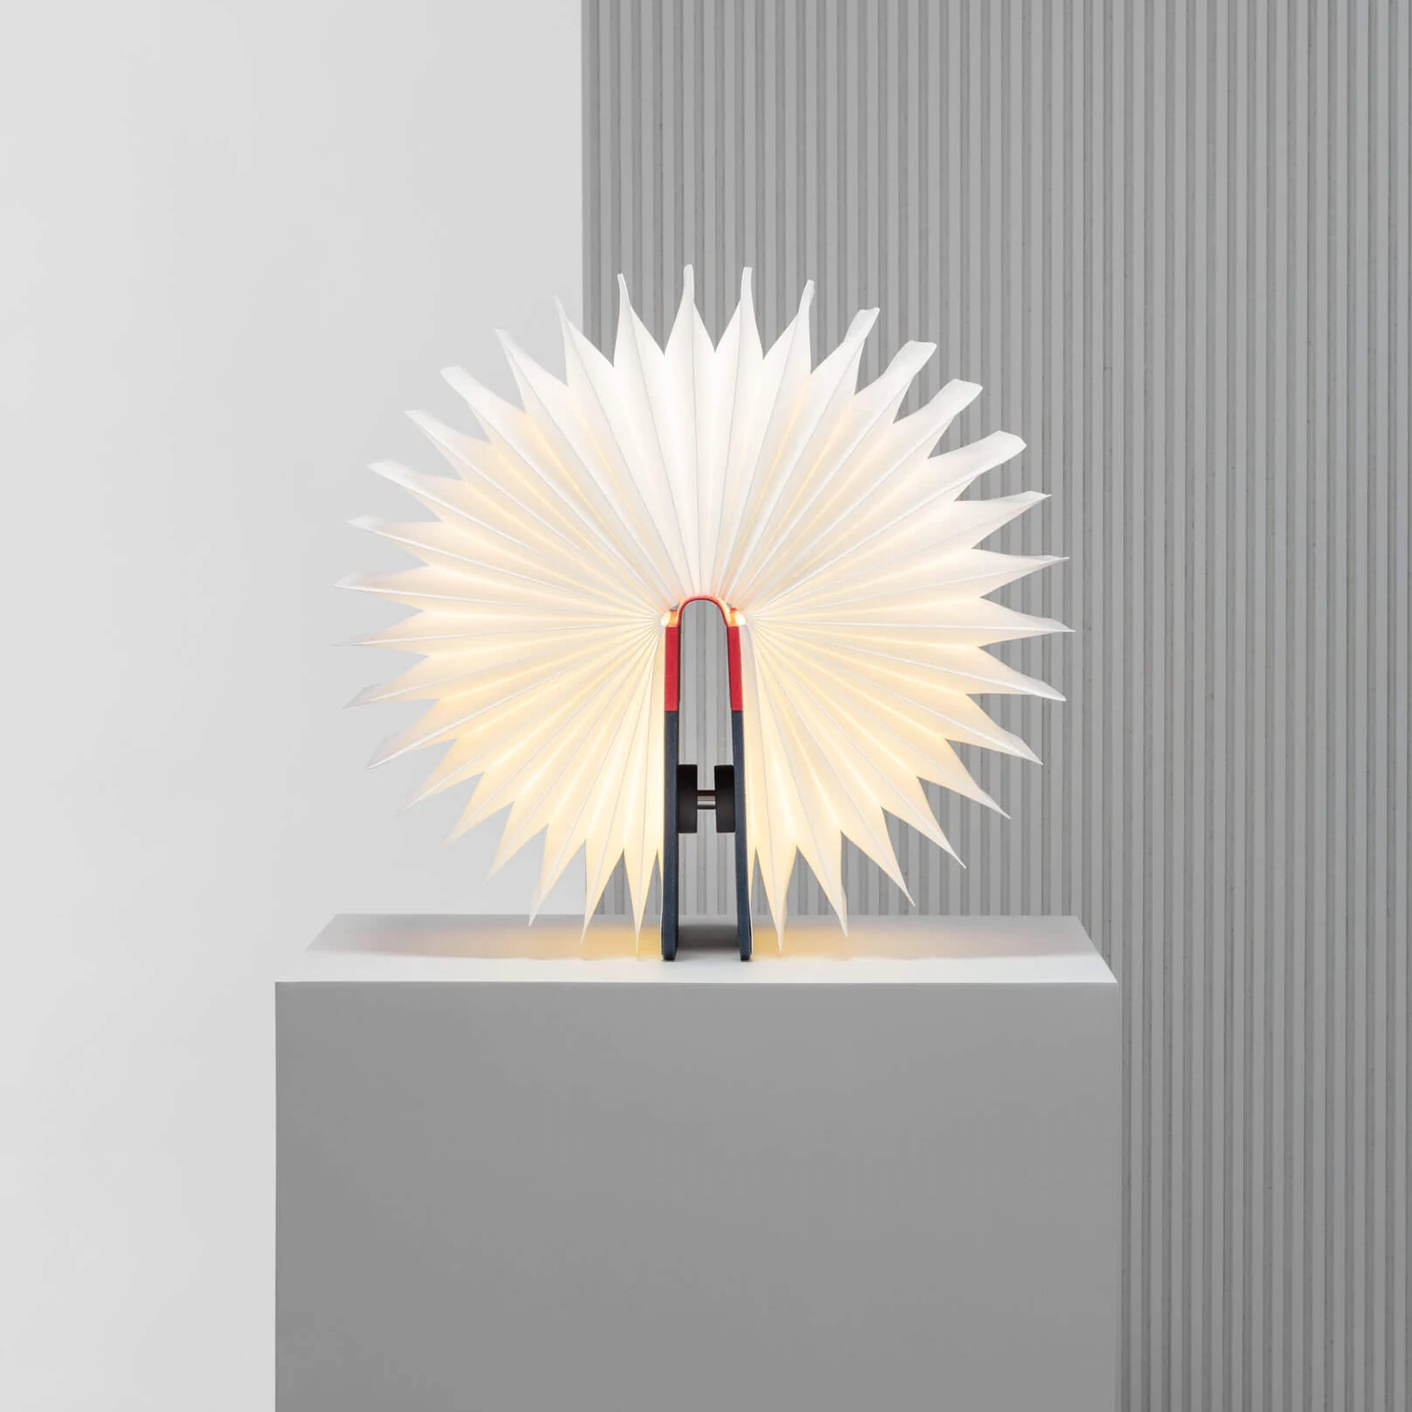 When closed, Lumio's Lito is a lamp concealed as a handsomely crafted, hard-cover book. Open it and it transforms into a sculptural light, radiating a warm glow.